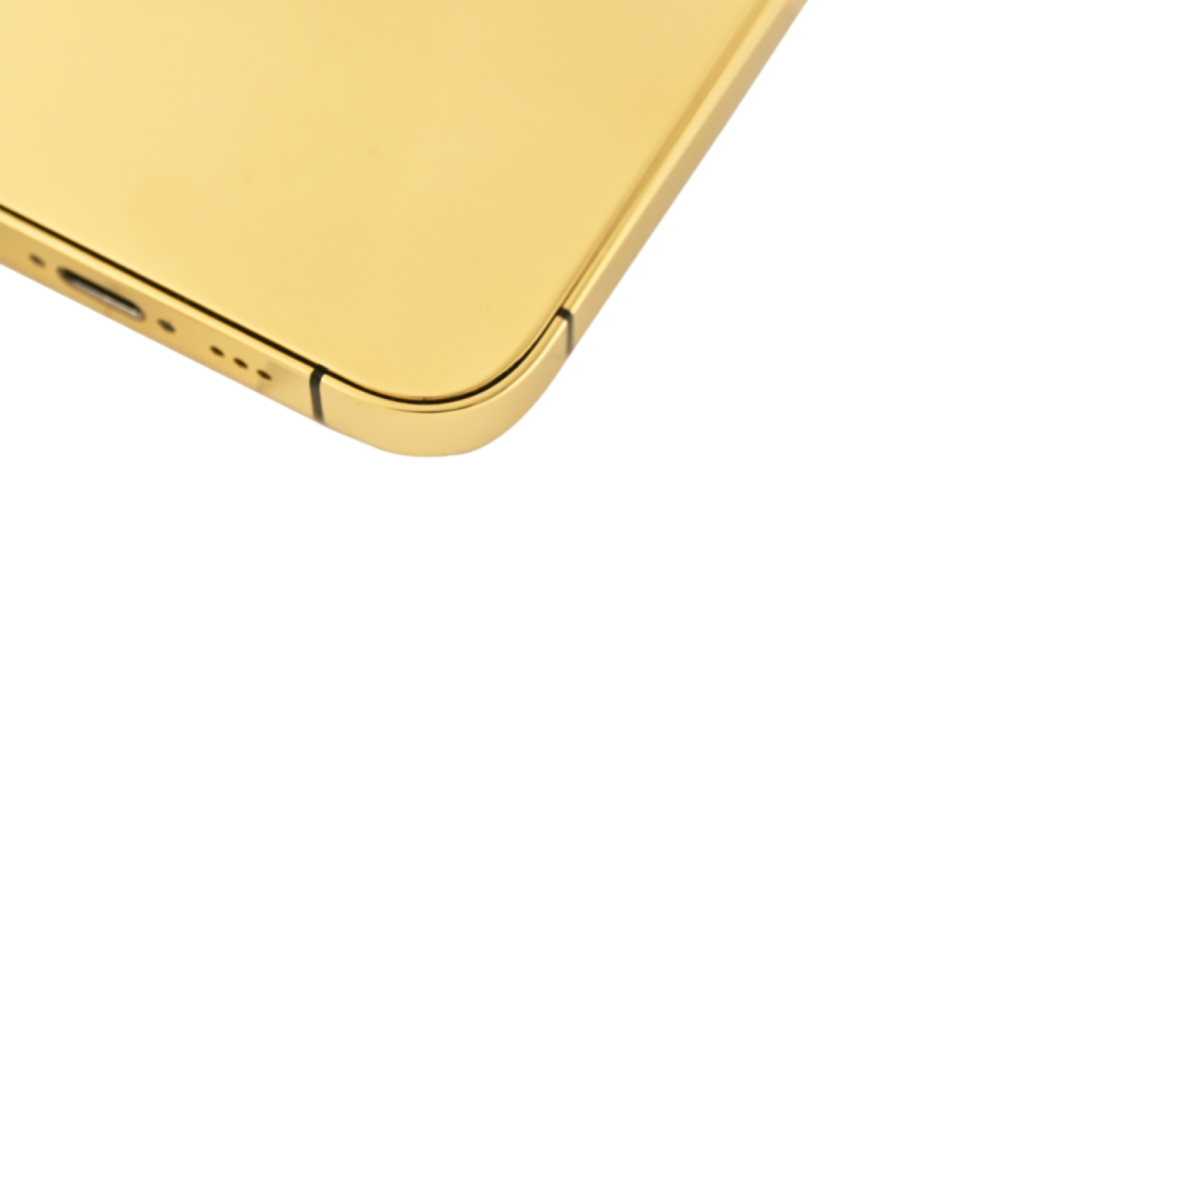 Caviar Luxury 24k Full Gold Customized iPhone 14 Pro 1 TB Limited Edition